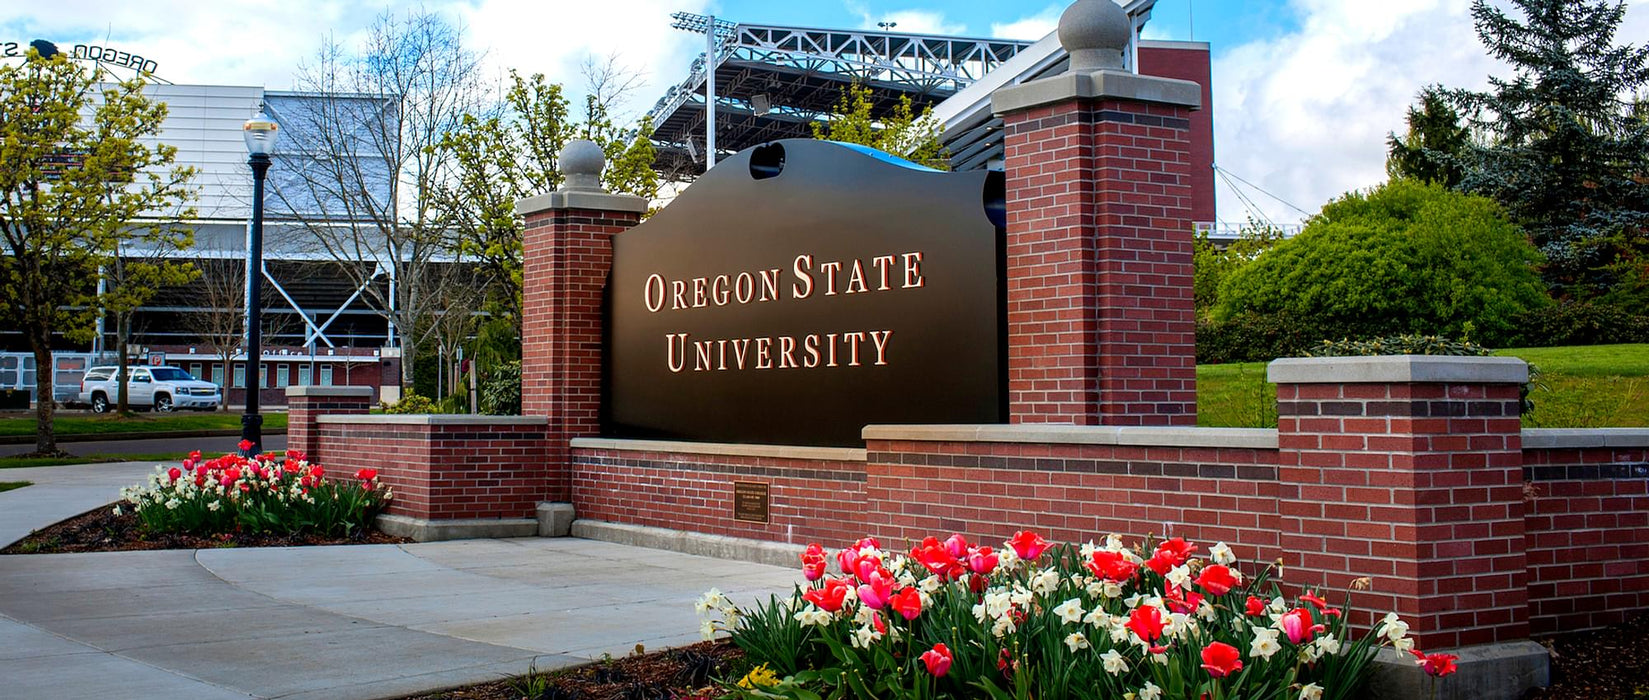 Master of Science - Industrial Engineering at Oregon State University - Corvallis: Tuition: $29,700.00 USD/year (Scholarship Available)